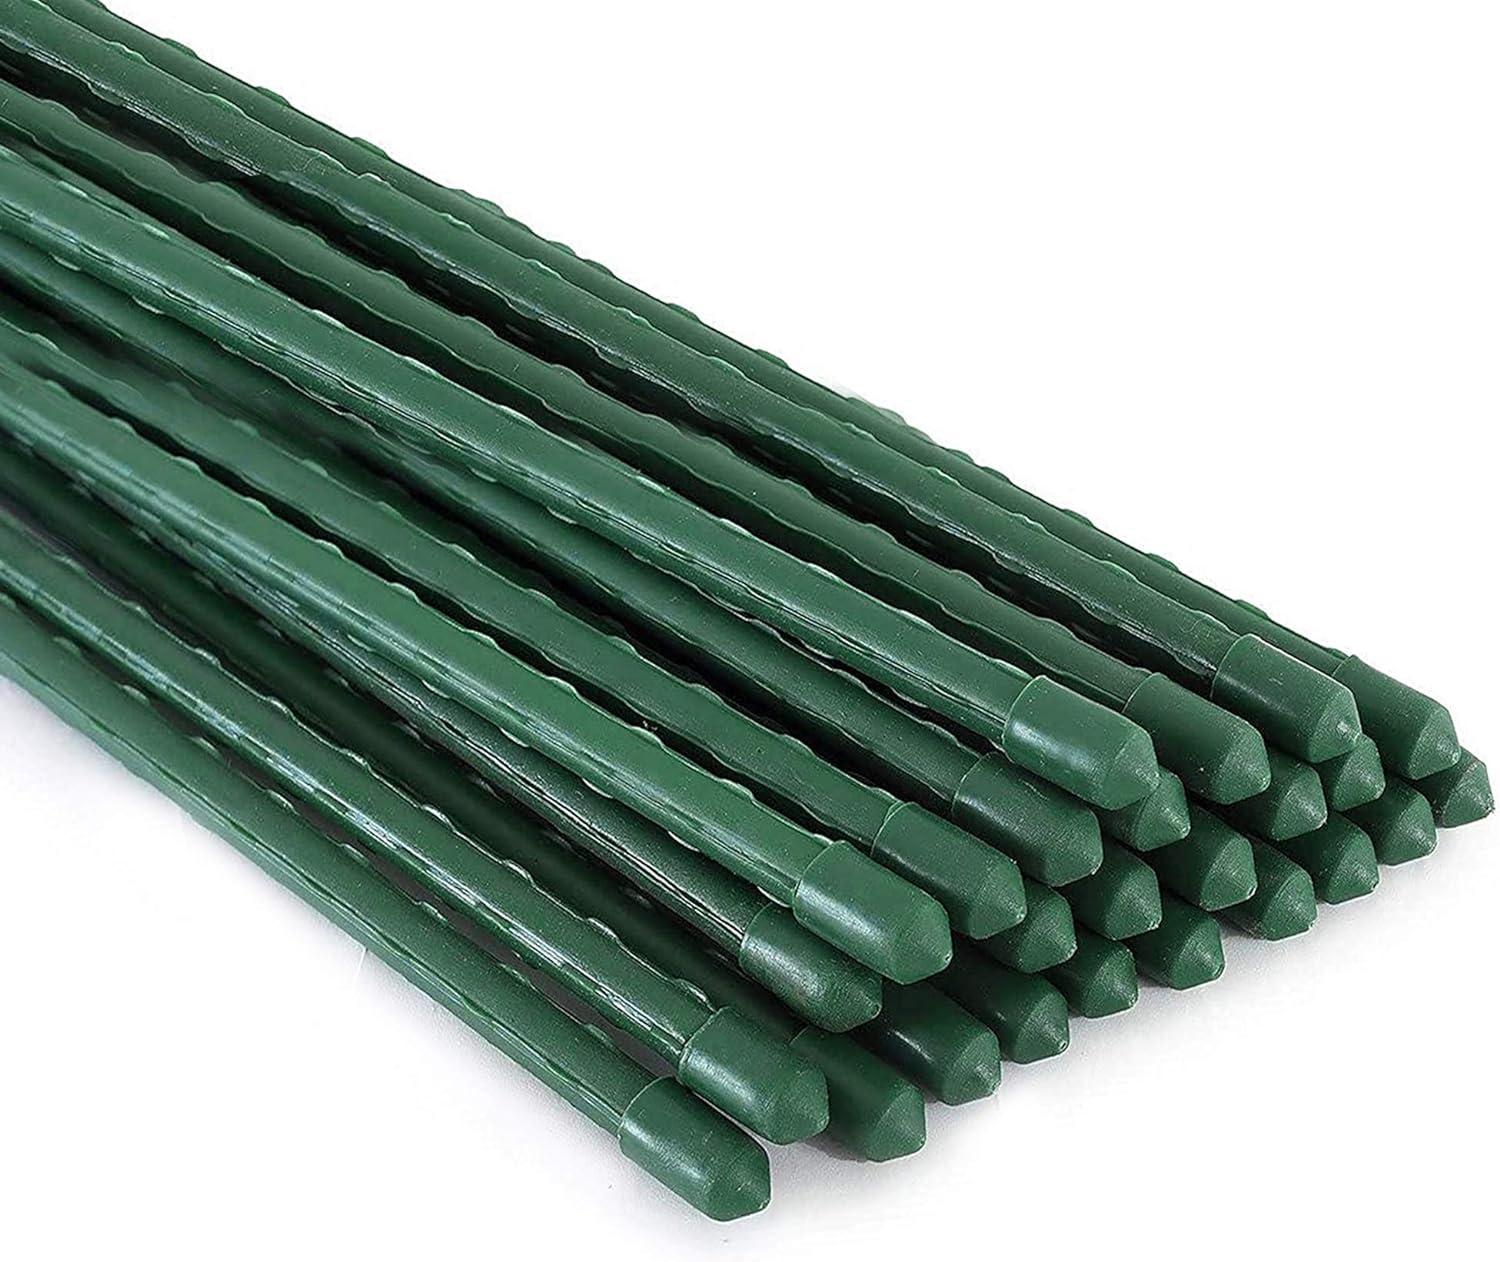 Plant Garden Tomato Stakes 25 Pack for $14.99